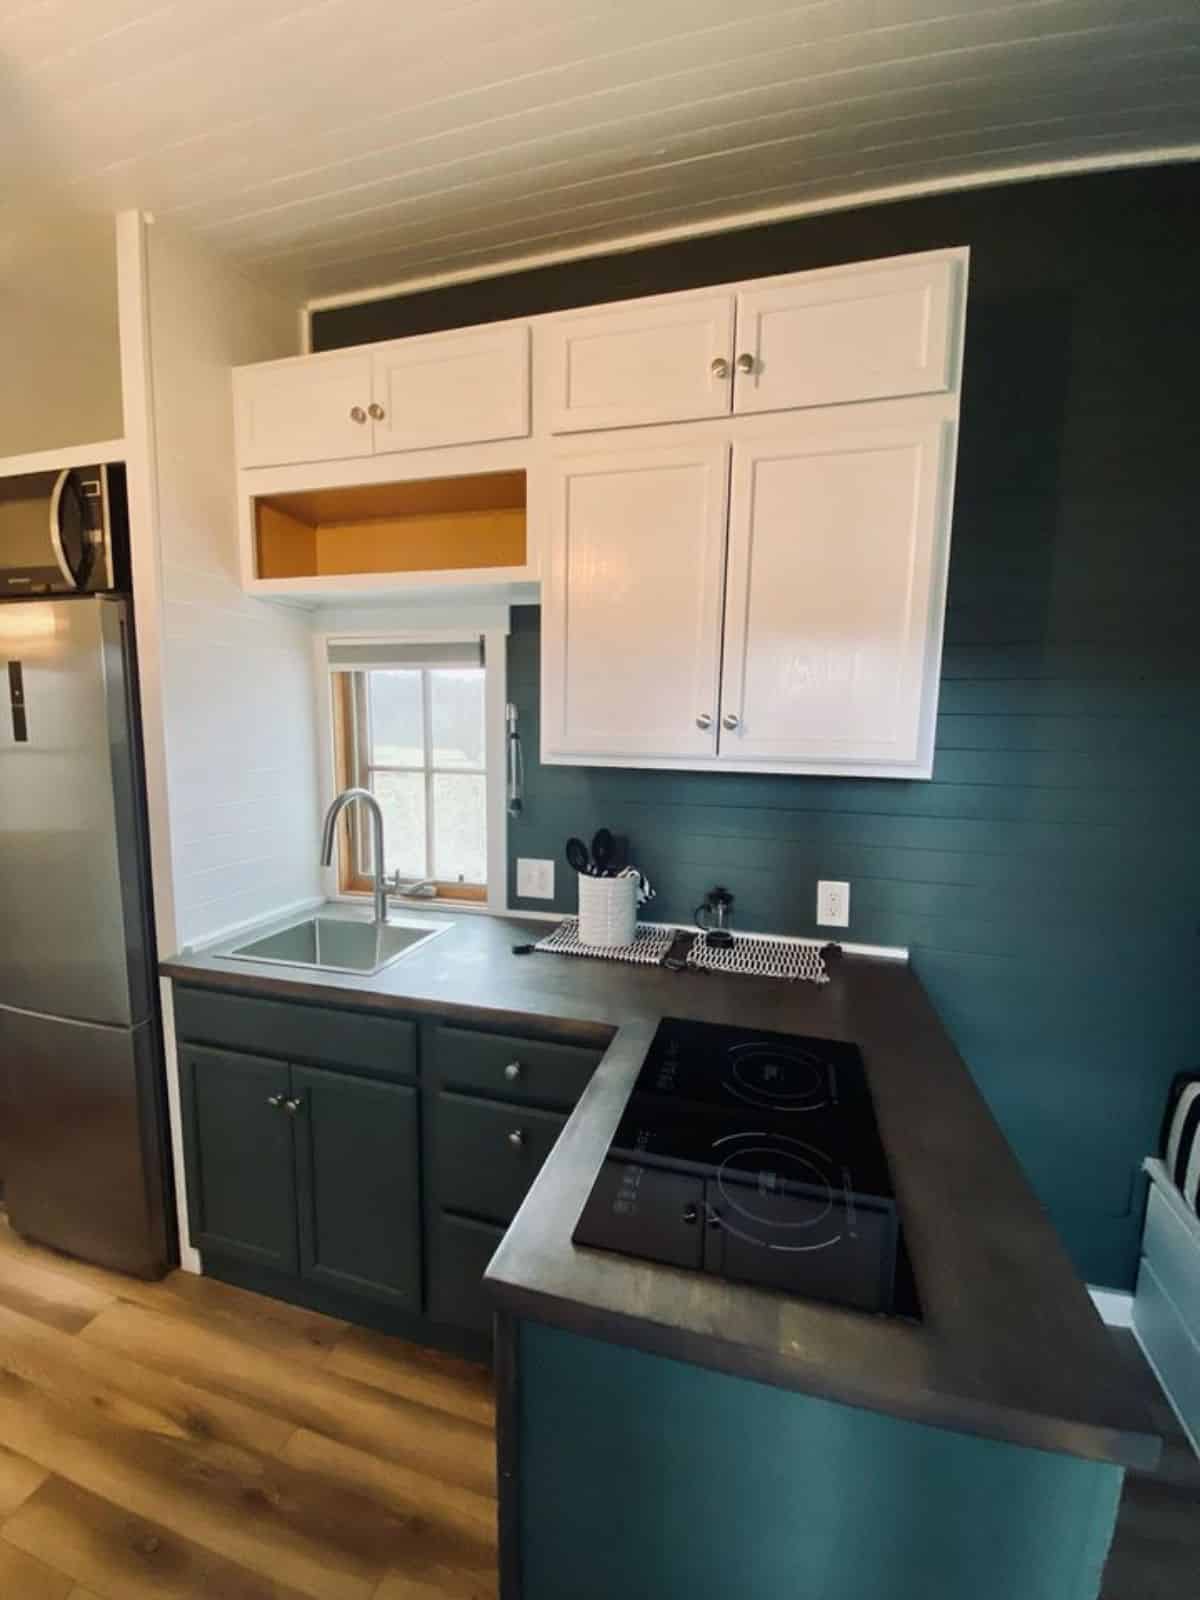 L shaped kitchen countertop with storage in kitchen of Tumbleweed tiny home